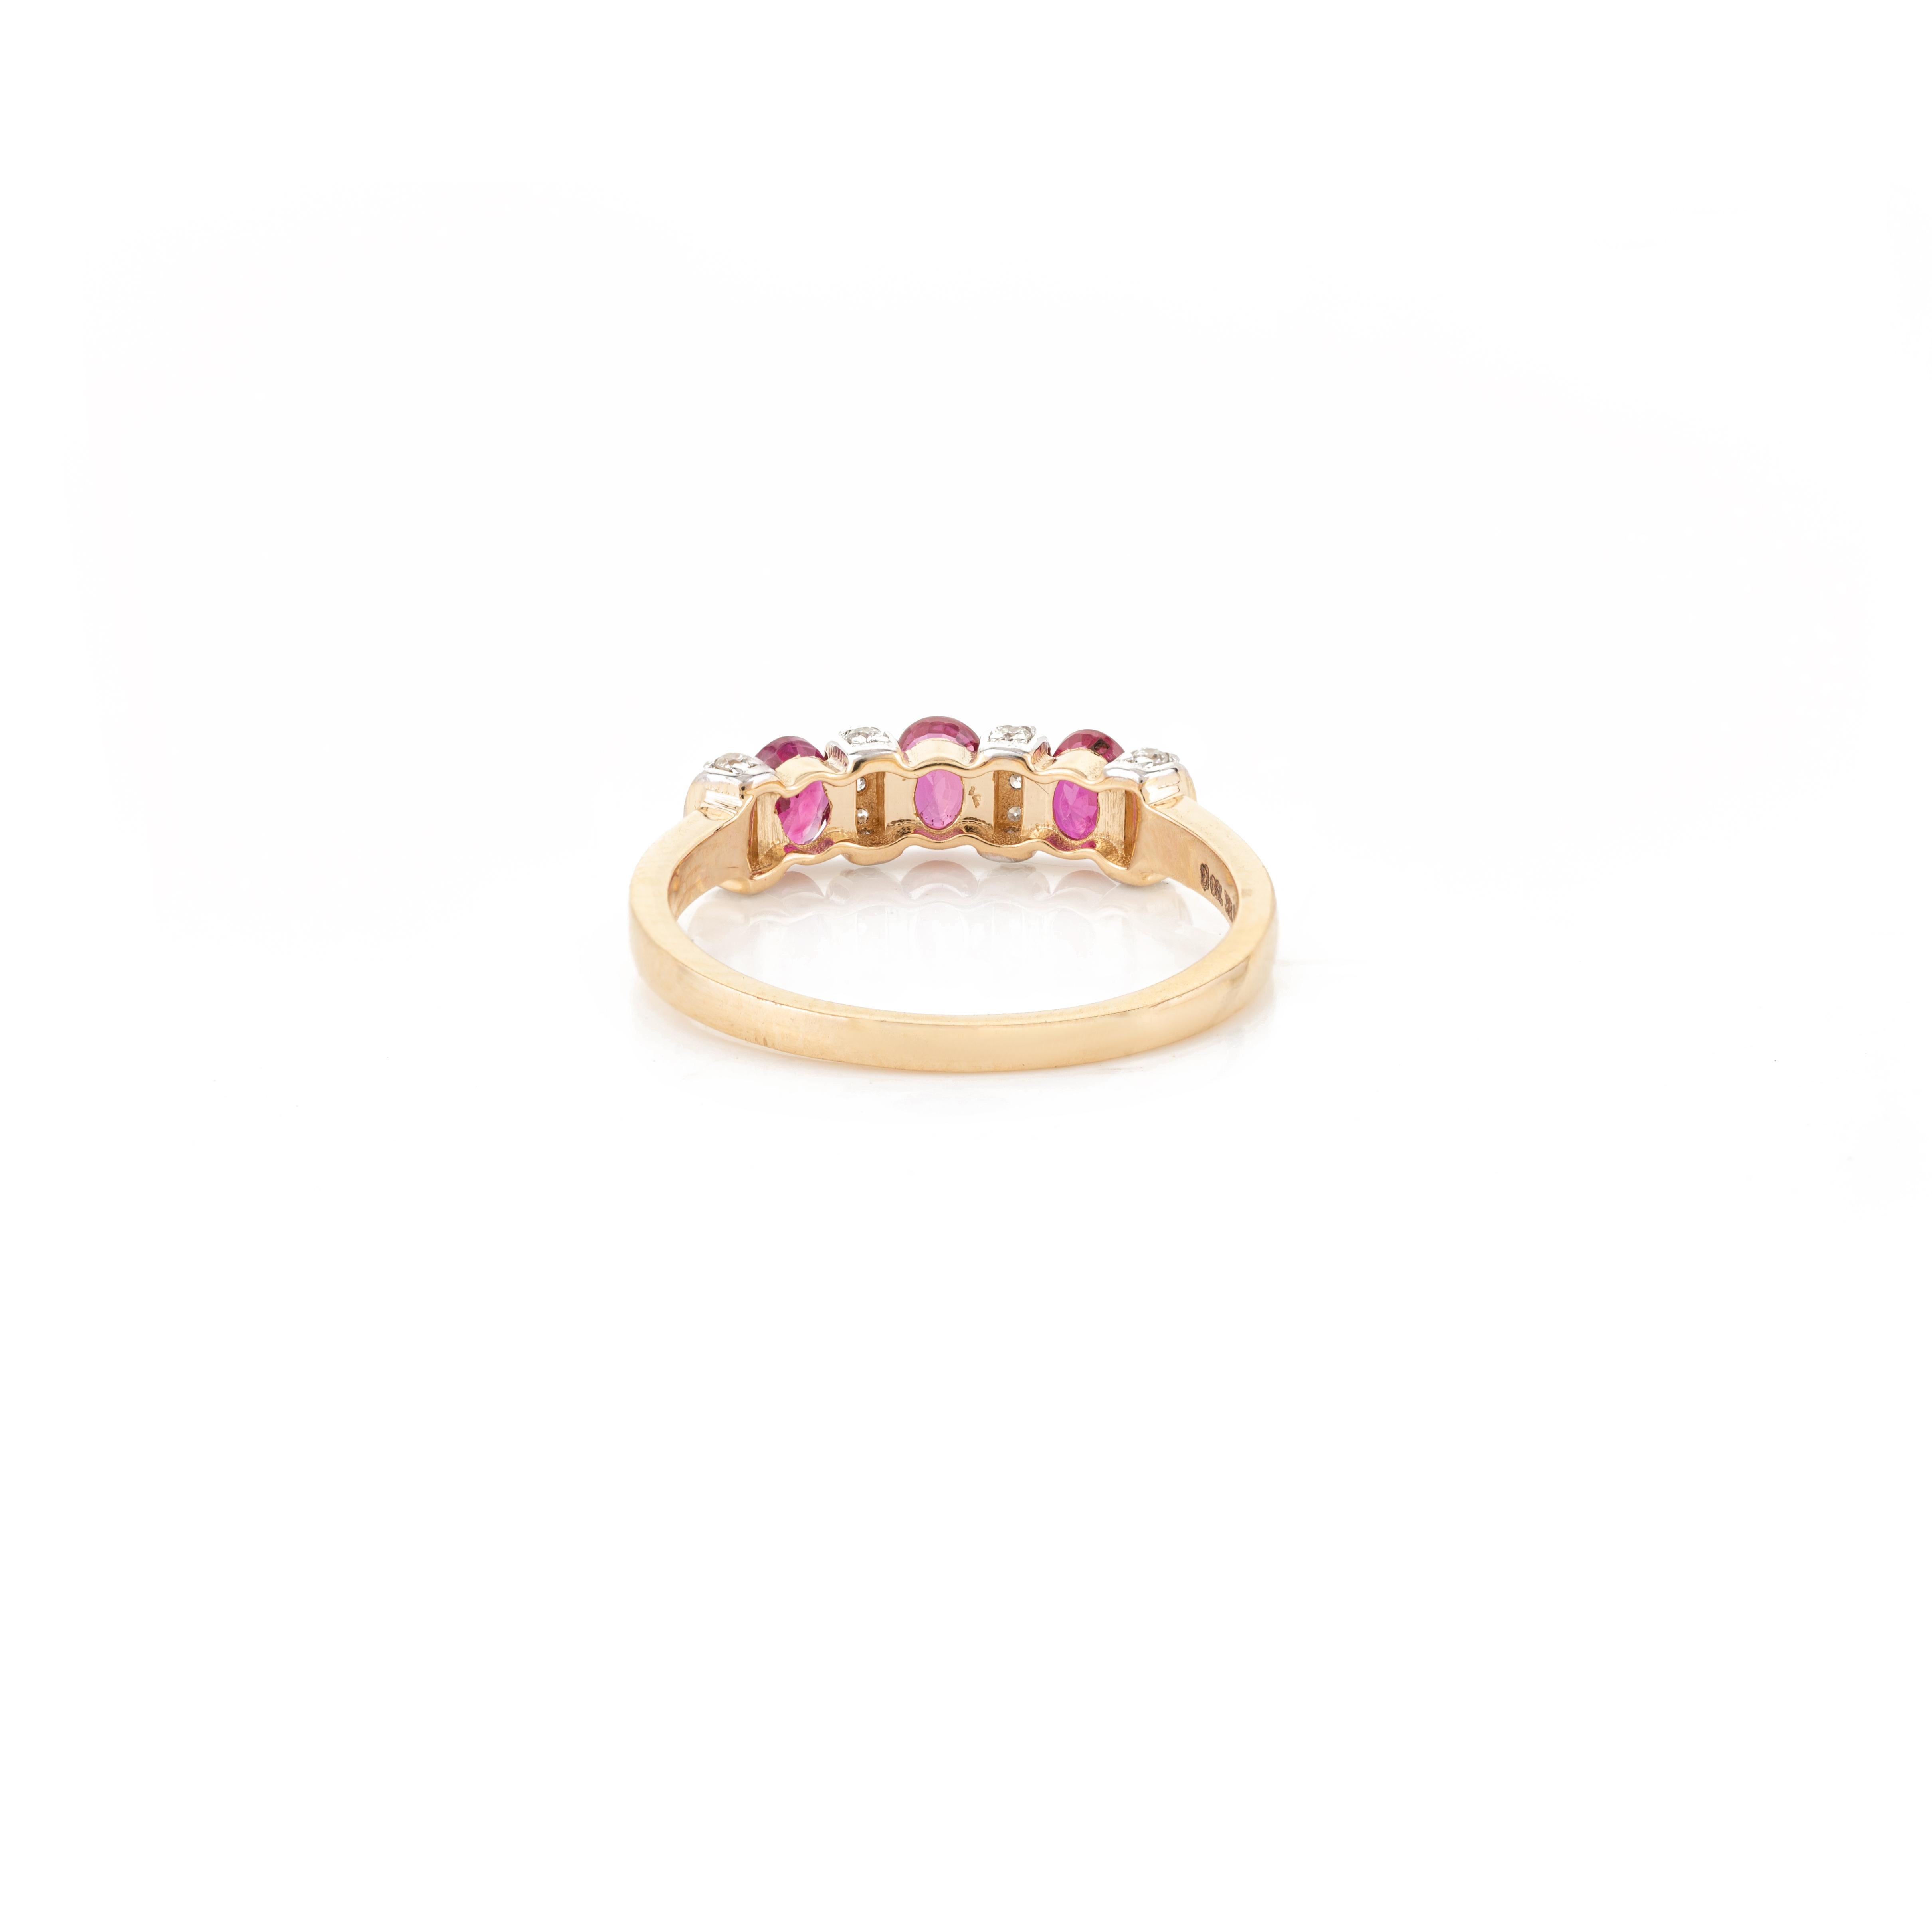 For Sale:  Alternating Ruby Diamond Engagement Band Ring in 18k Solid Yellow Gold  7